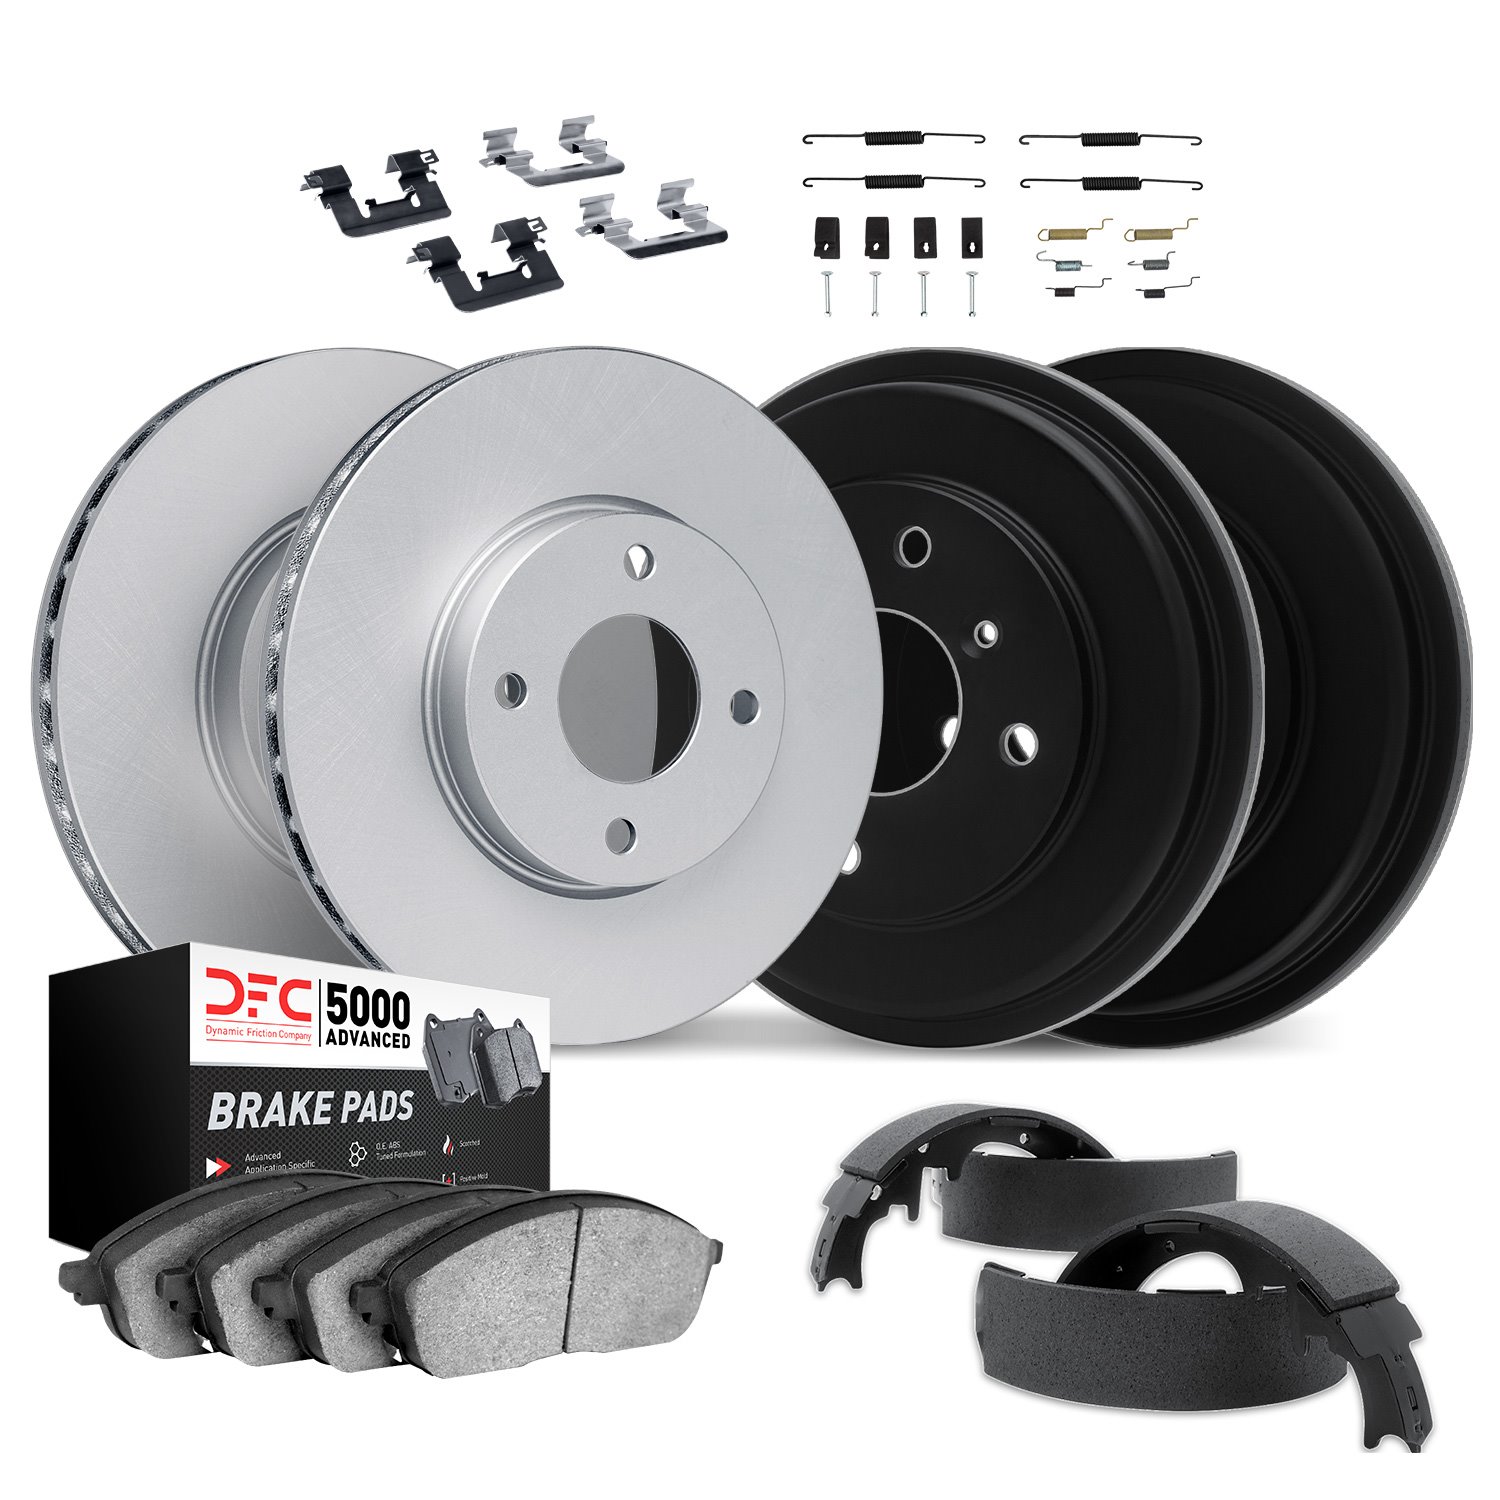 4514-72027 Geospec Brake Rotors w/5000 Advanced Brake Pads/Drums/Shoes & Hardware Kit, 2002-2007 Mitsubishi, Position: Front and